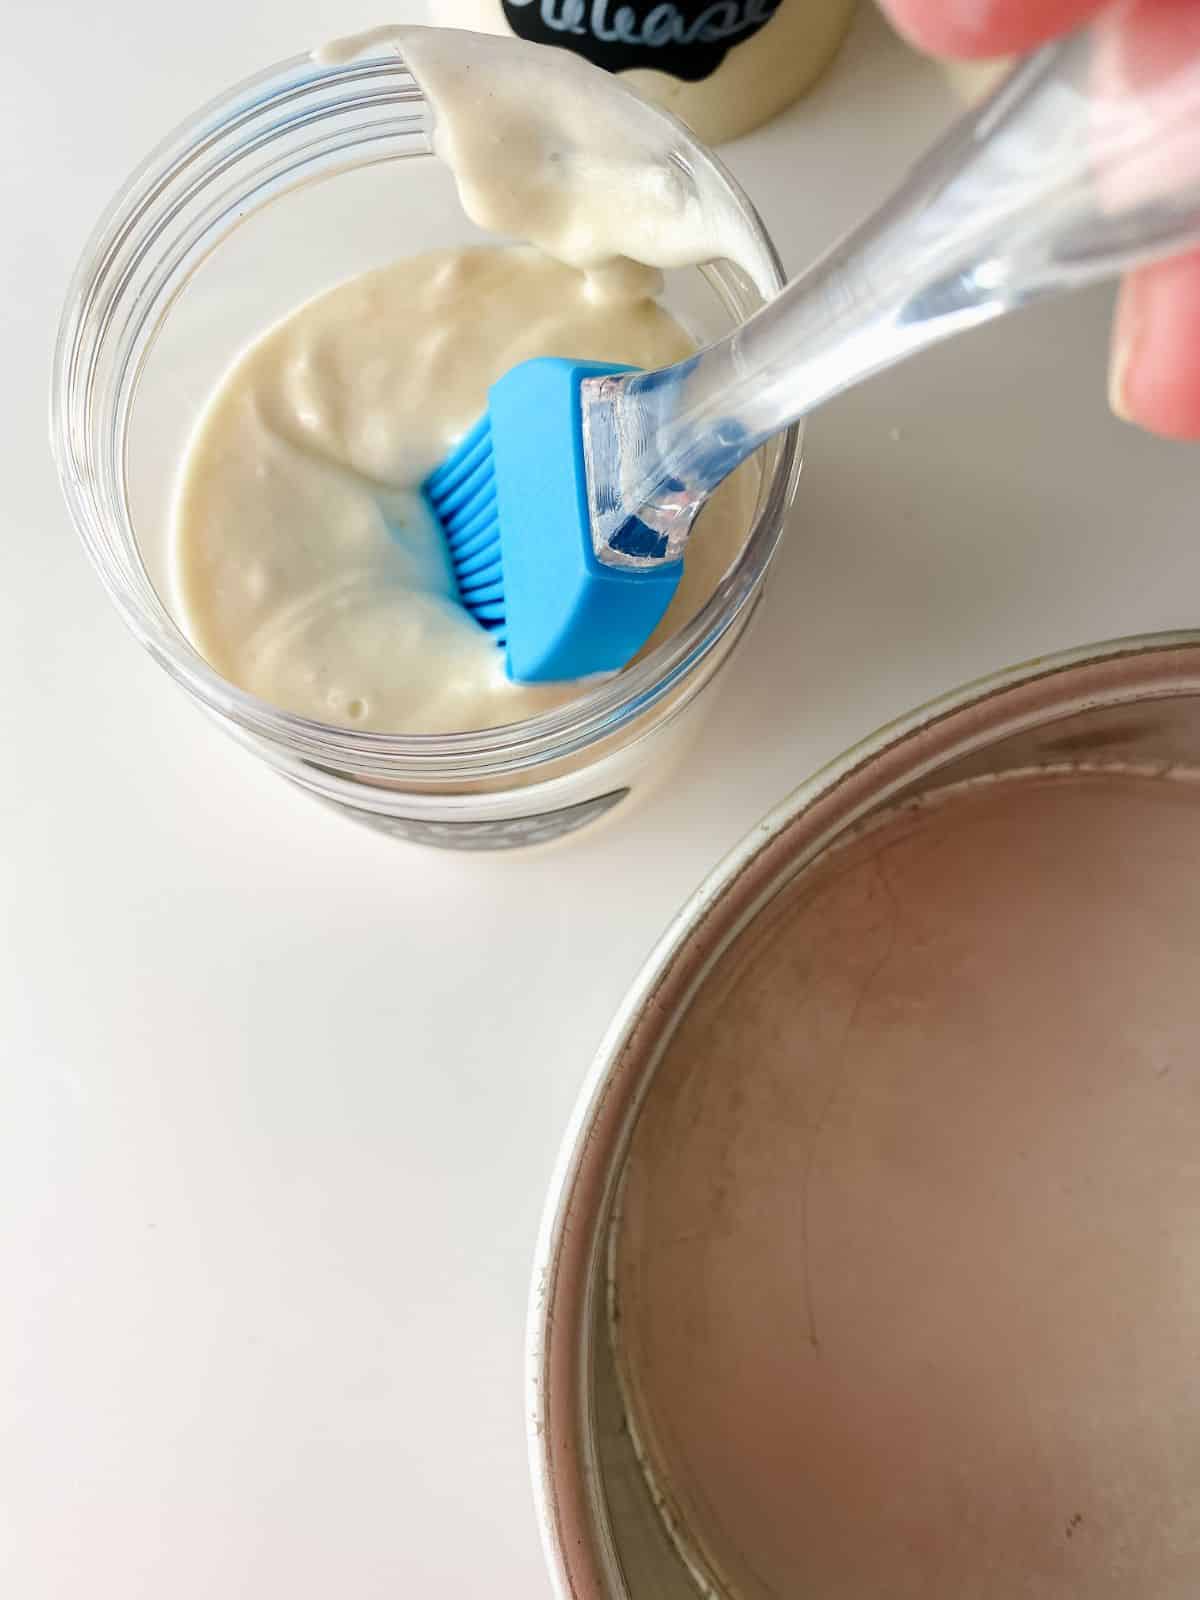 blue silicone pastry brush dipping into jar of cake release